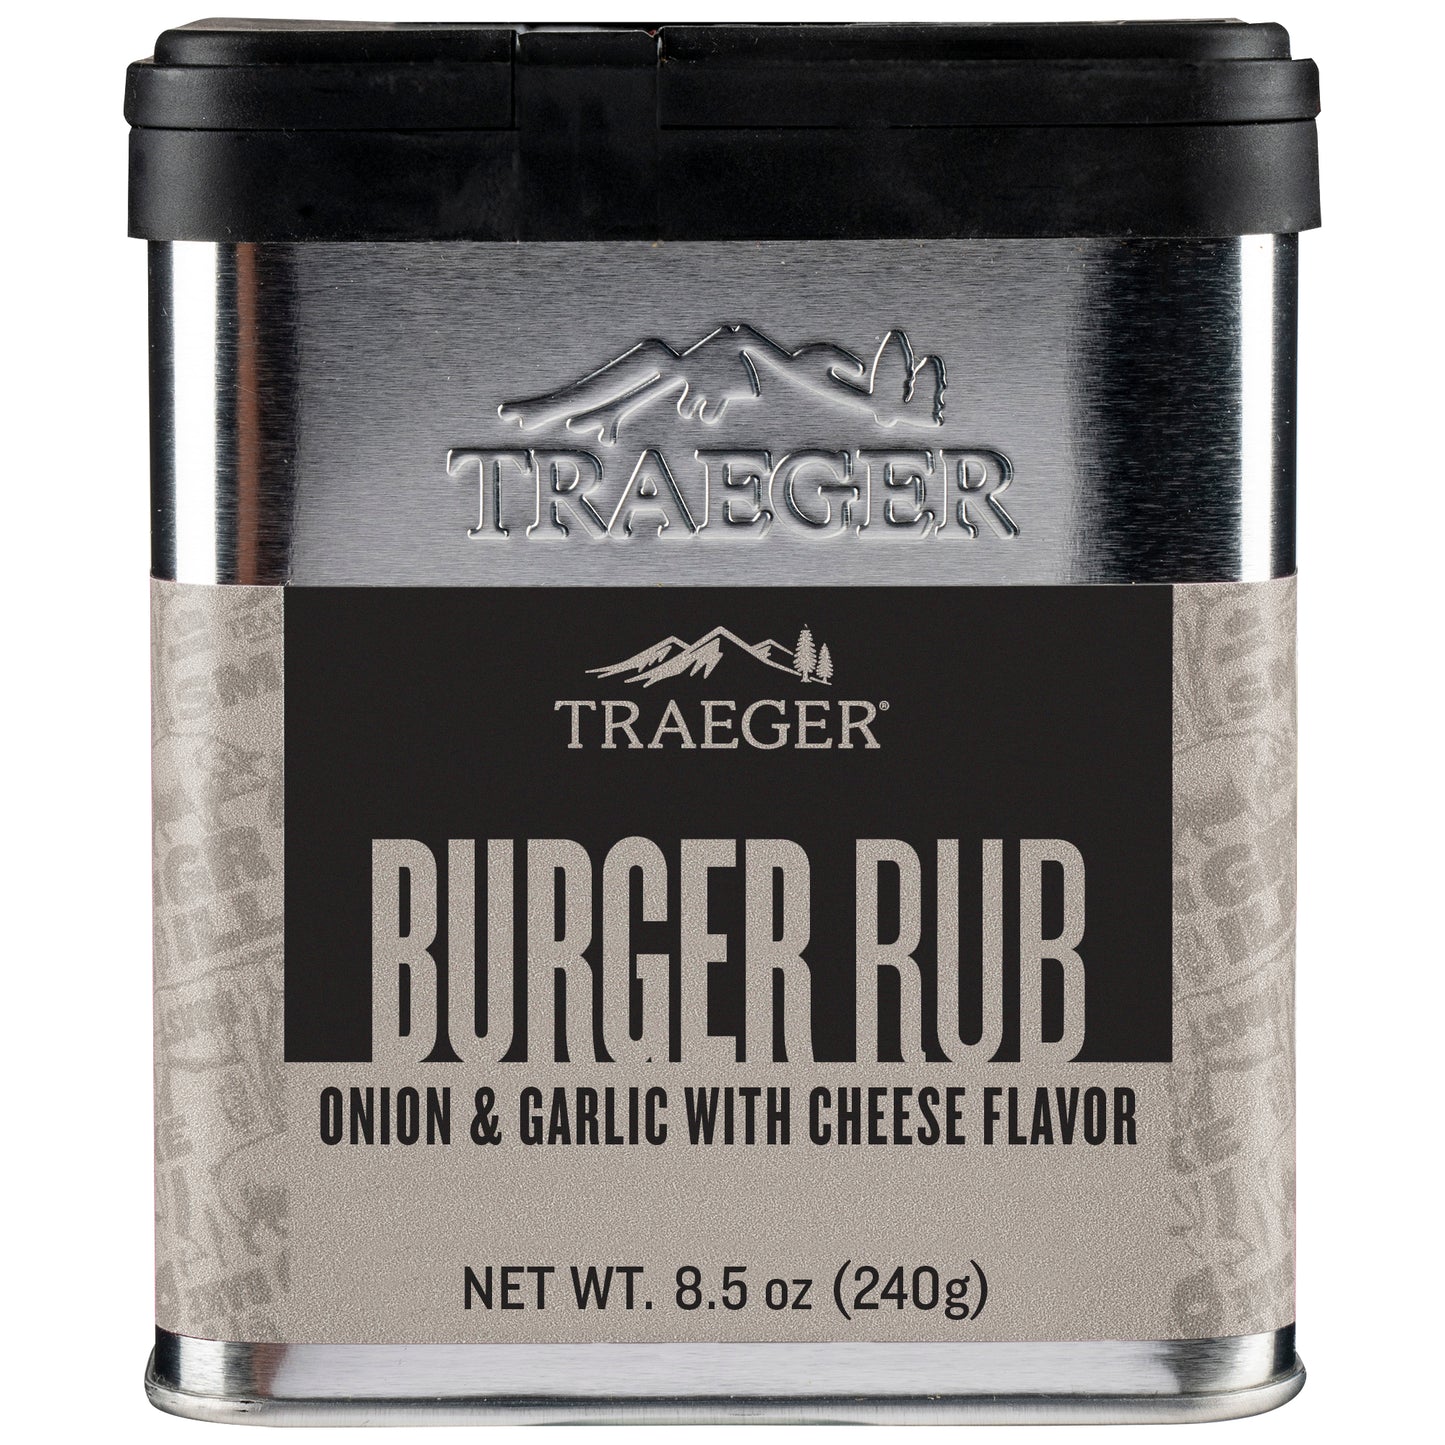 Traeger's Burger Rub has flavors of onion, garlic and cheese.